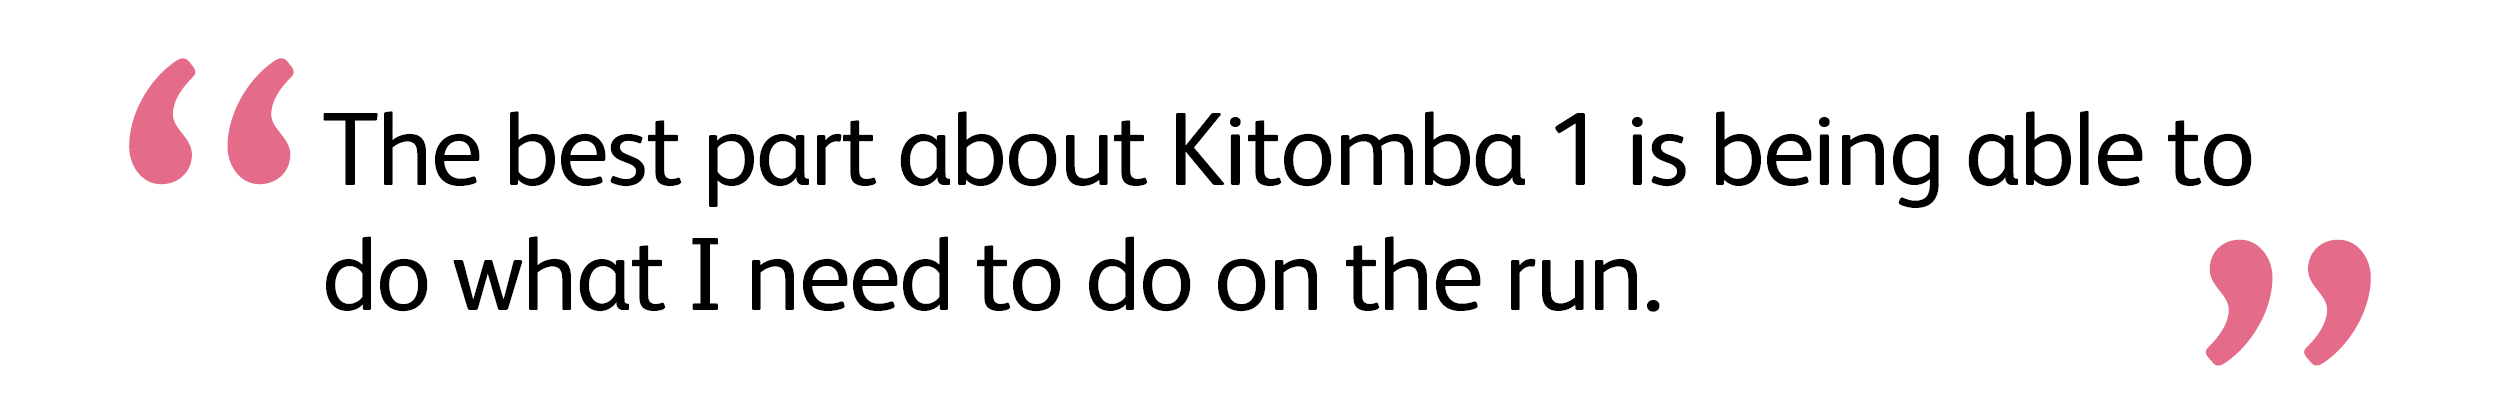 The best part about Kitomba 1 is being able to do what I need to do on the run.